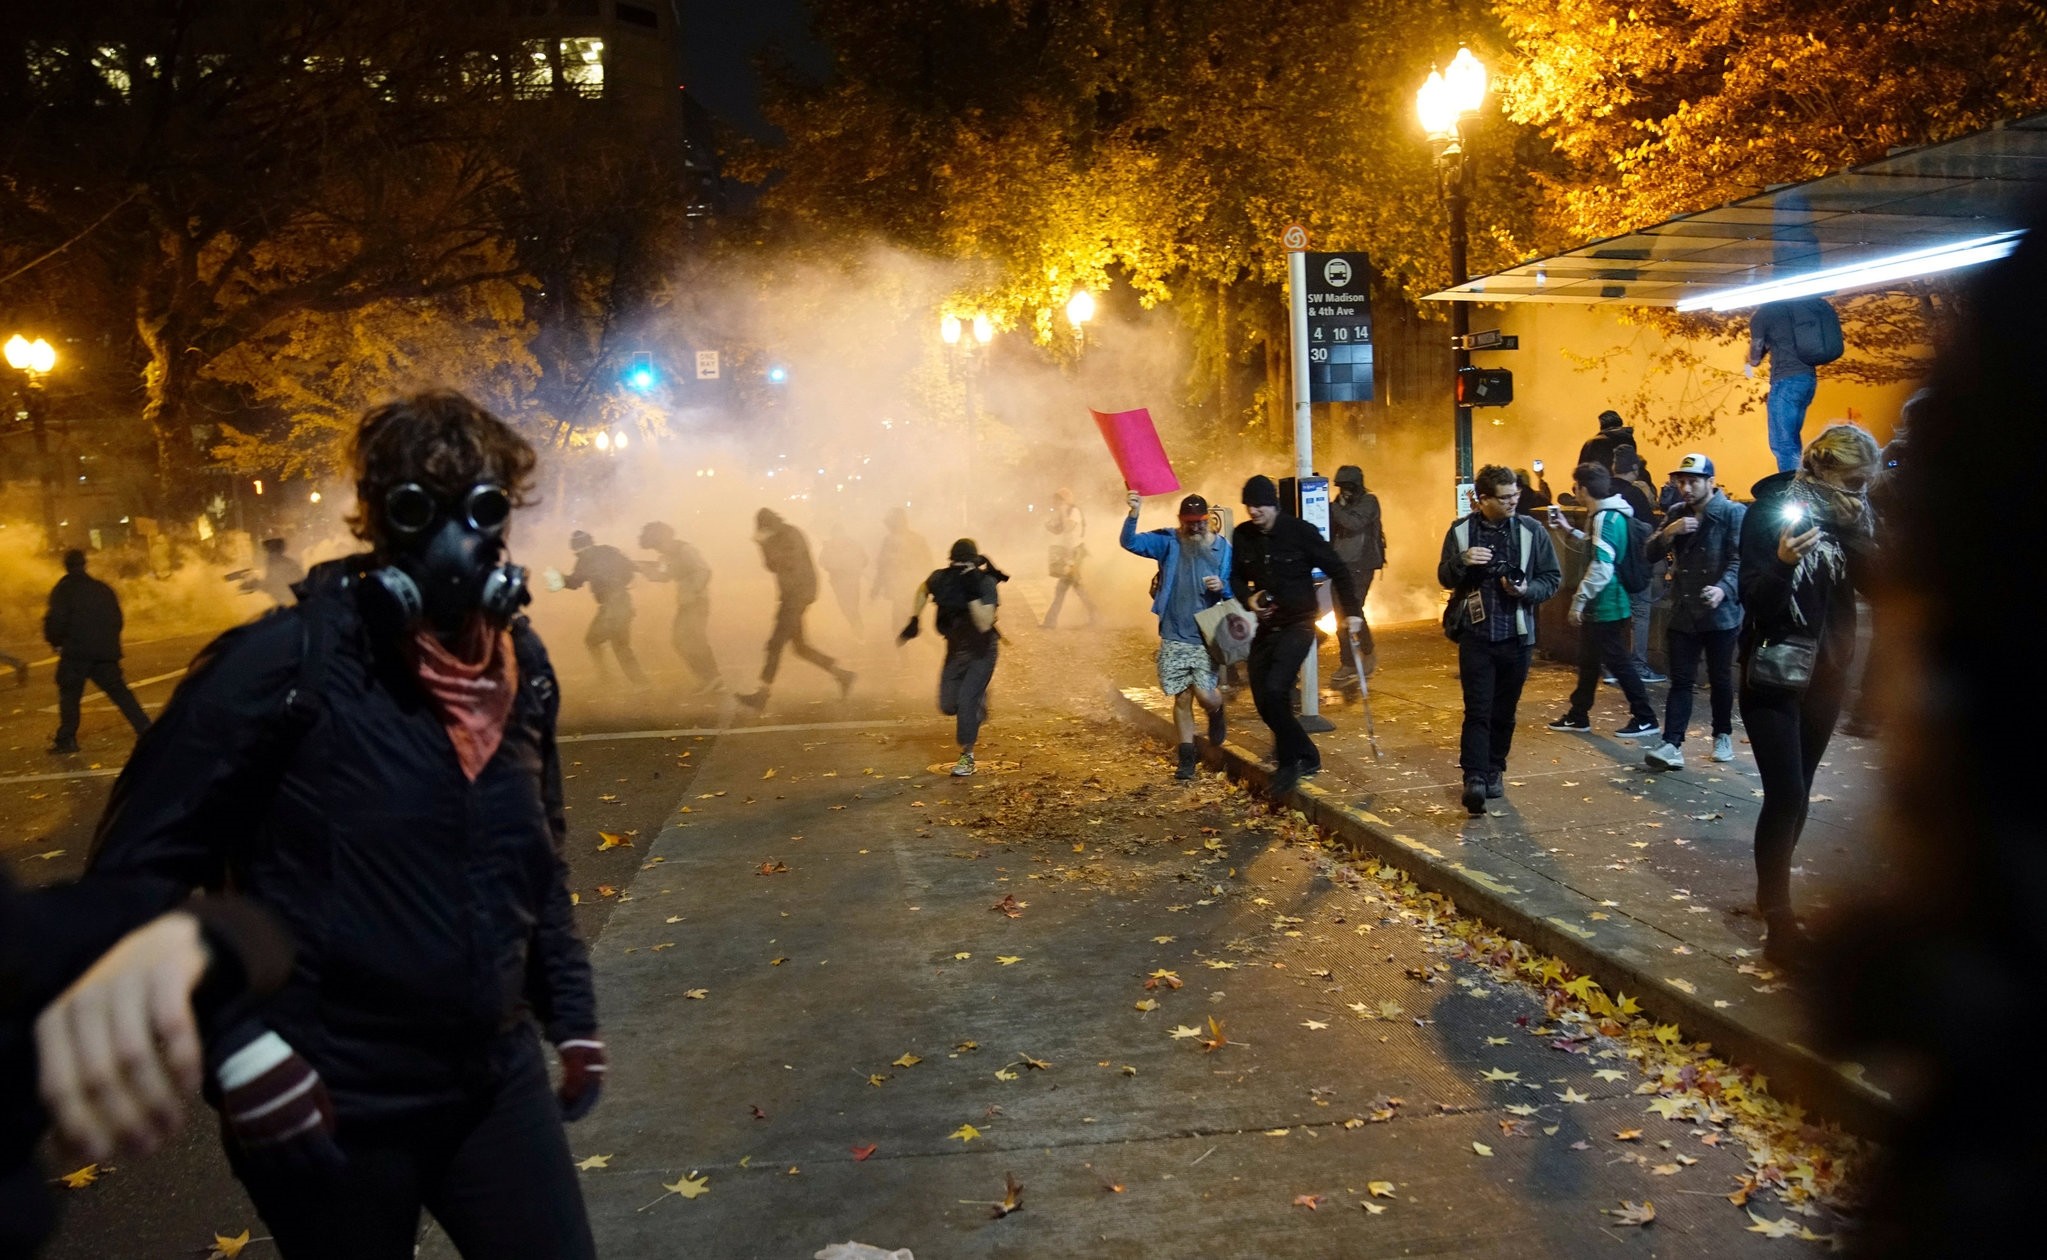 People try to move away from a gas cloud during a protest against Trump as President of the U.S. in Portland, Oregon, U.S. November 12, 2016. (REUTERS Photo)